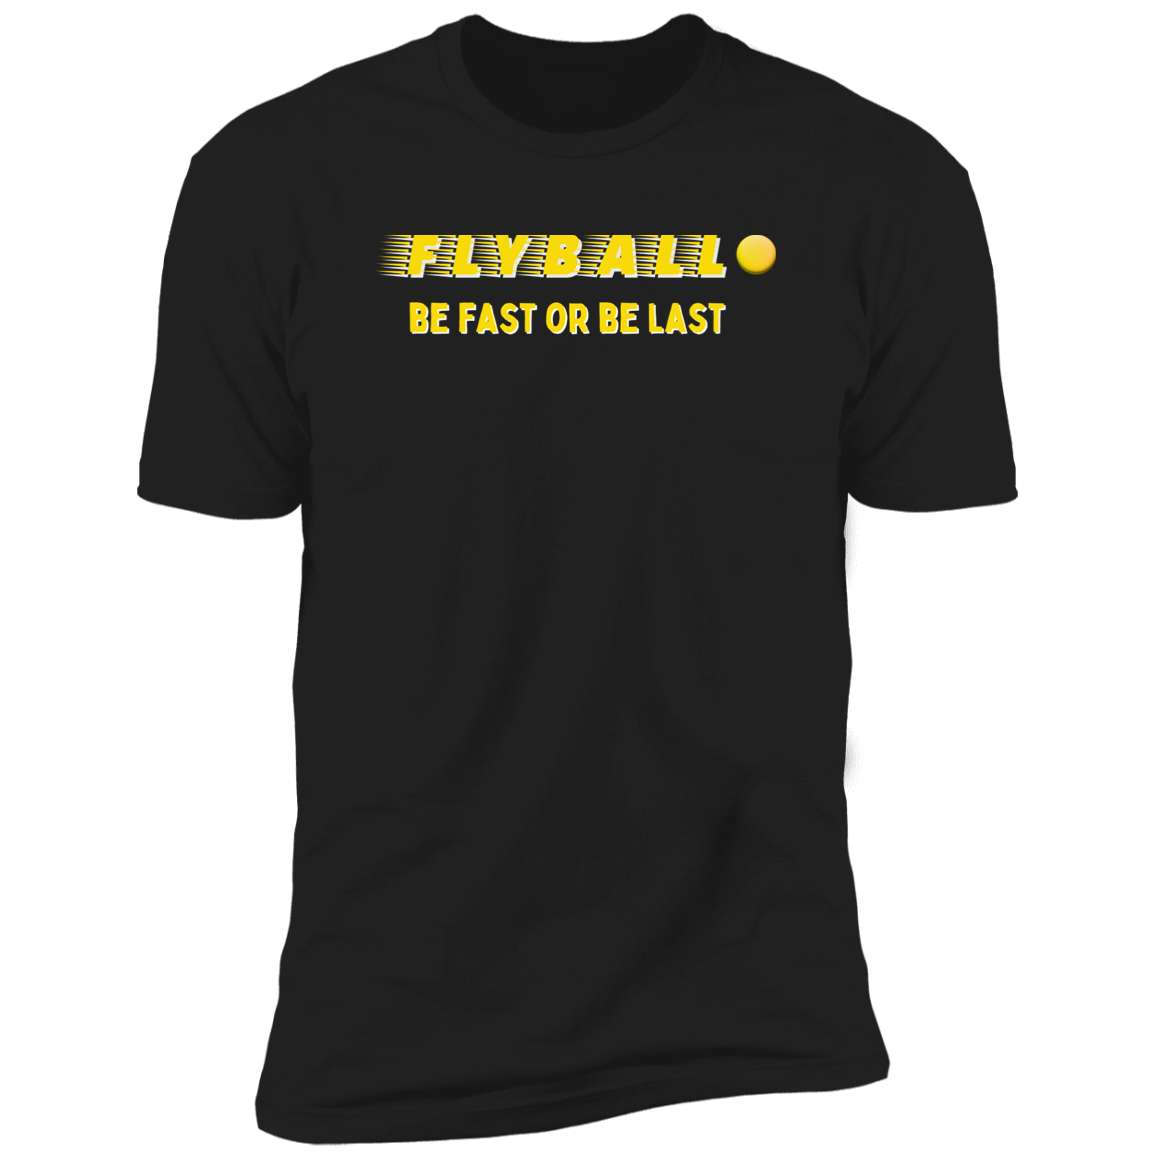 Flyball Be Fast or Be Last Dog Sport T-shirt, Flyball Shirt for humans, in black